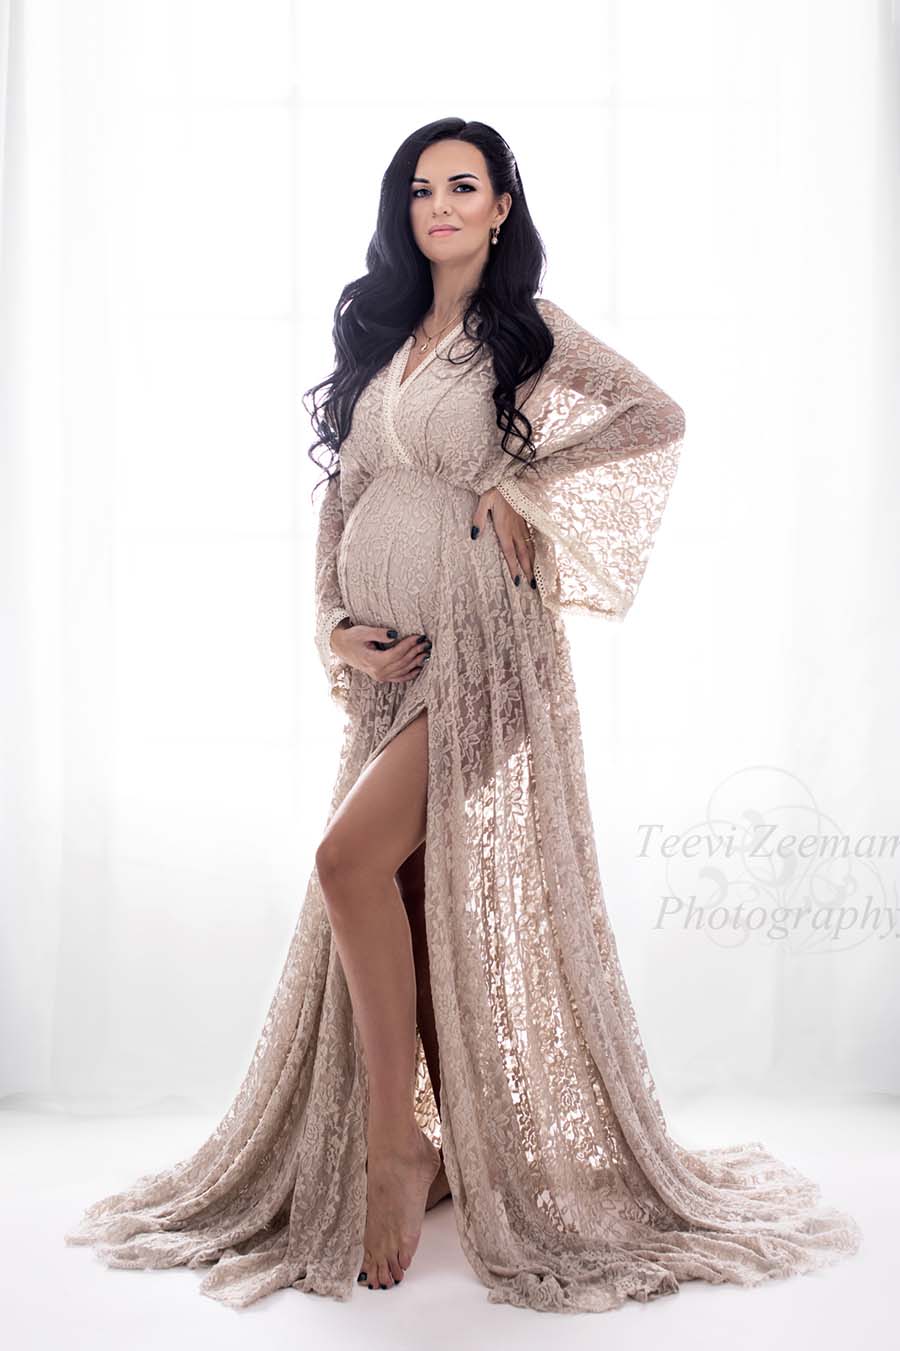 dark haired pregnant model poses in a studio wearing a long dress made of lace in sand color. she stares at the camera while holding her waist and bump. the top of the dress has a low v cut neckline and kaftan sleeves. the long circle skirt has a side split. 